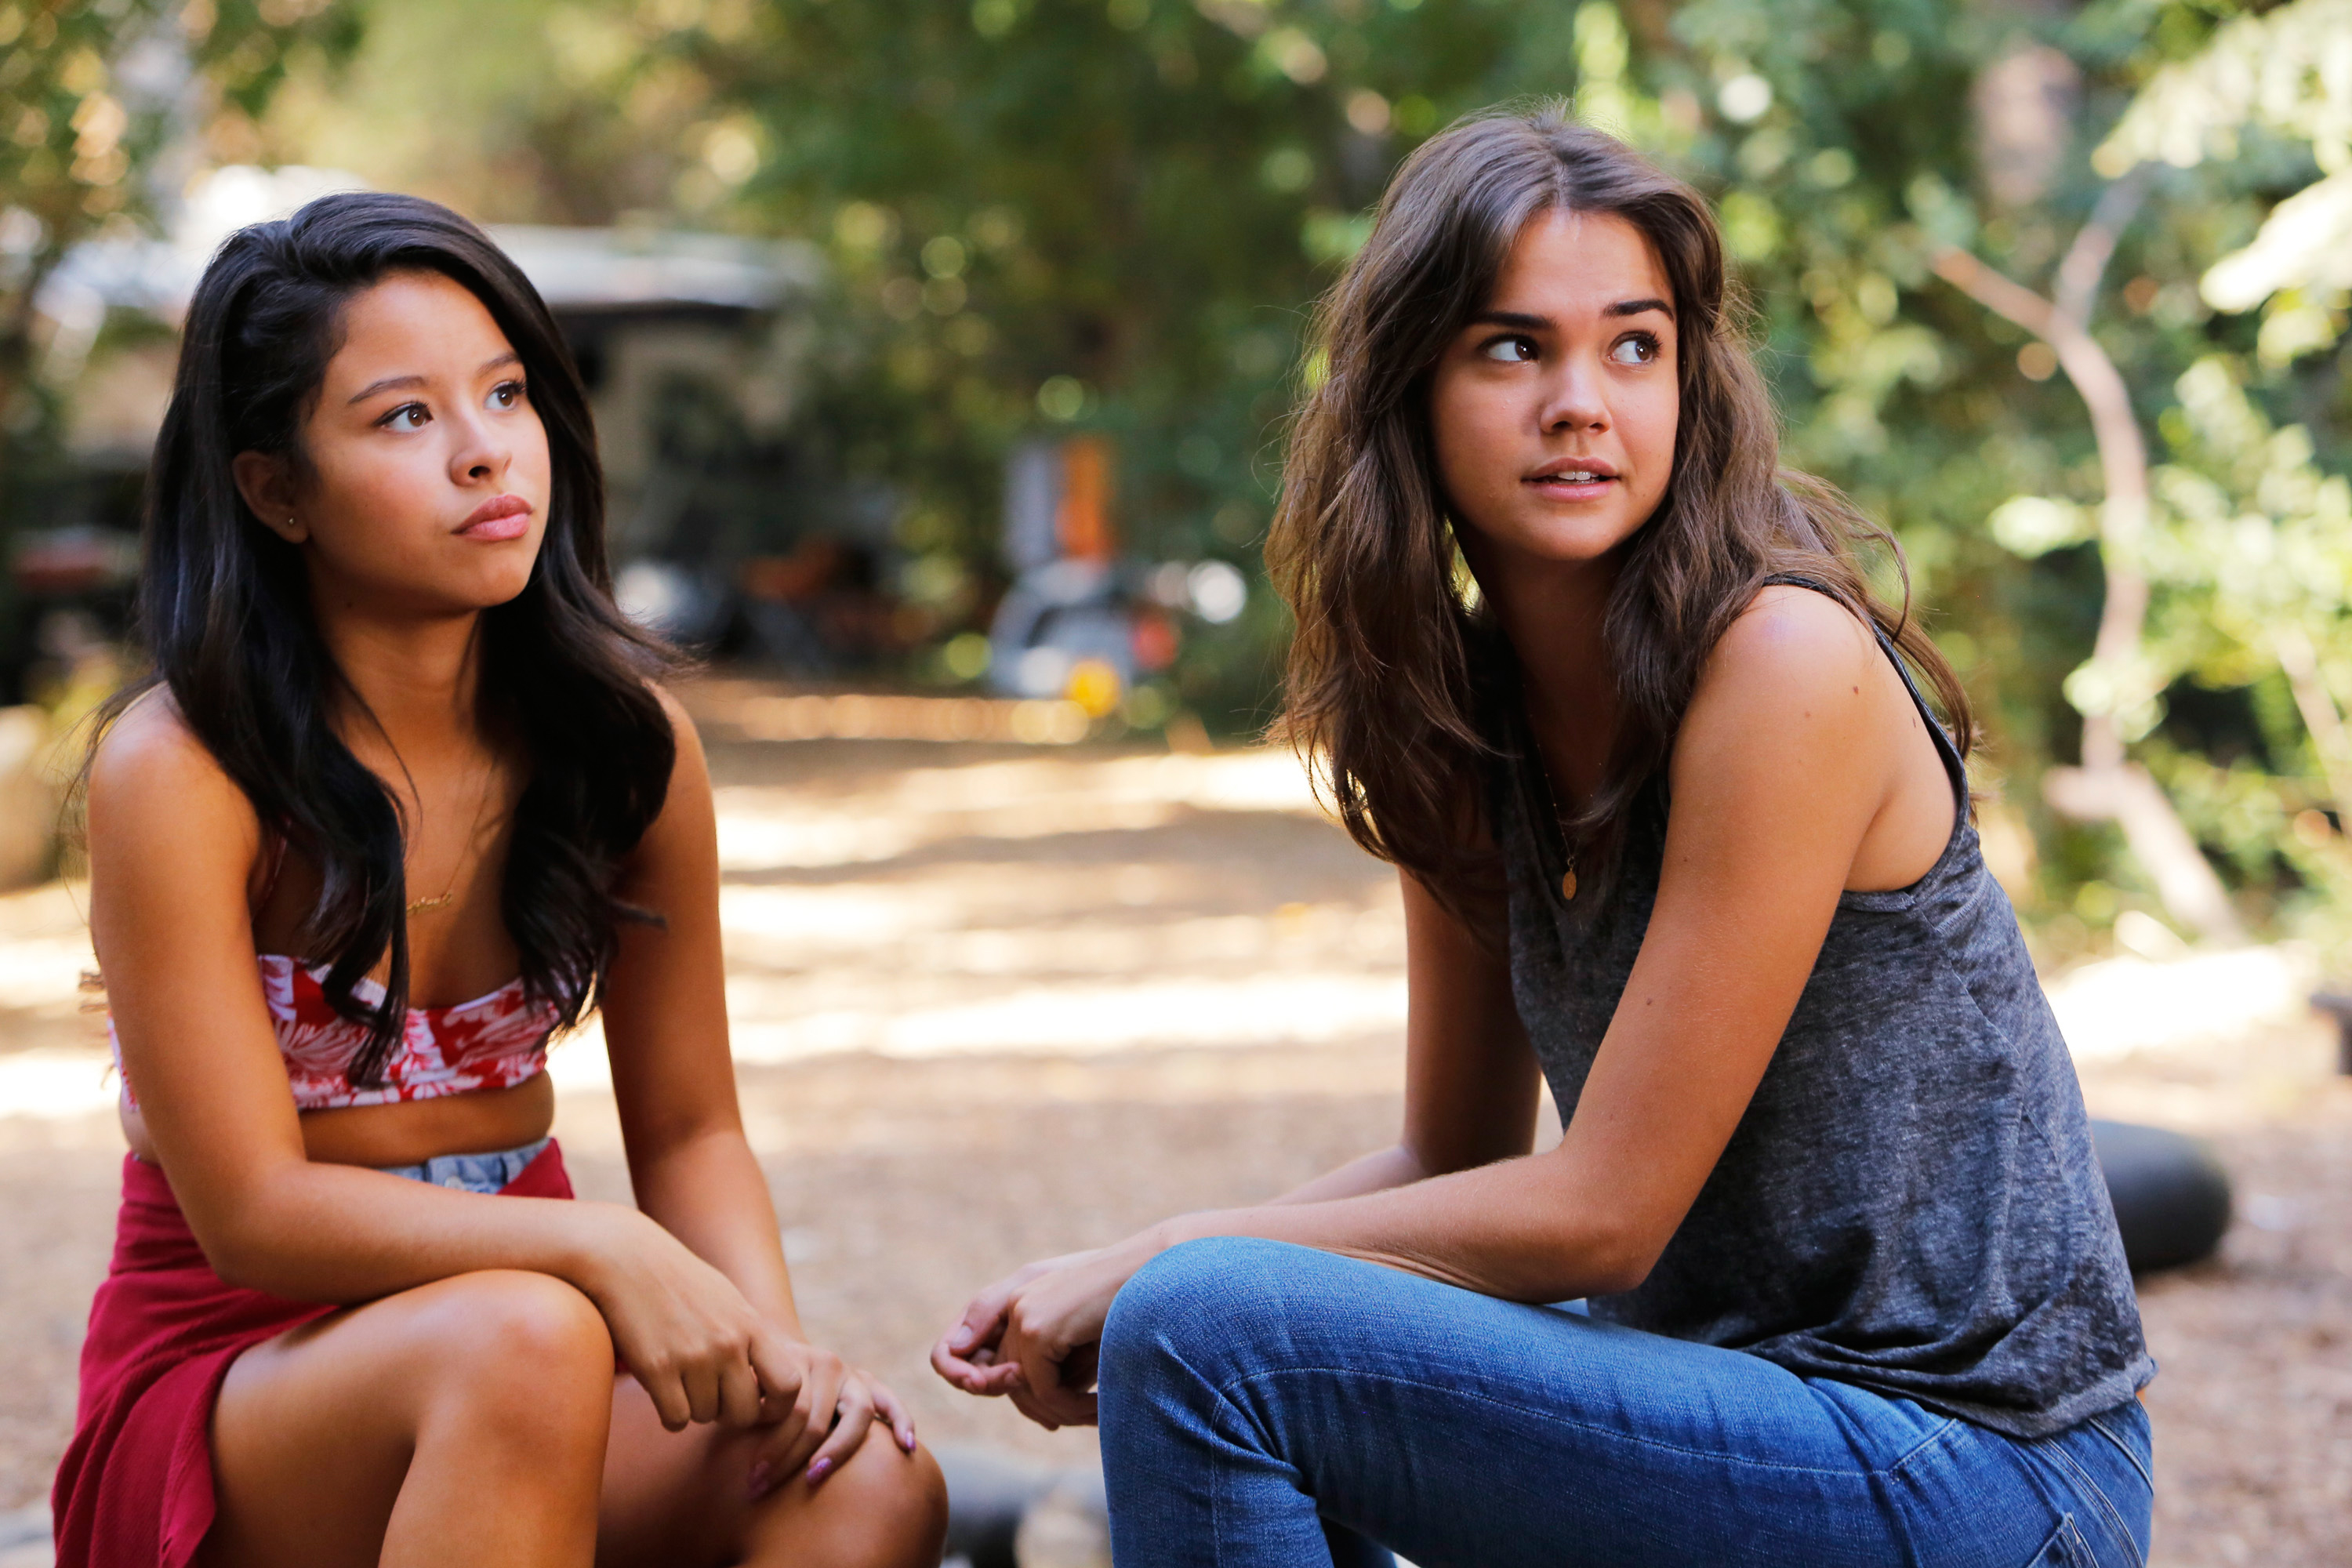 Cierra Ramirez and Maia Mitchell are seated outdoors, engaging in conversation. Cierra wears a cropped top and skirt; Maia wears a sleeveless top and jeans